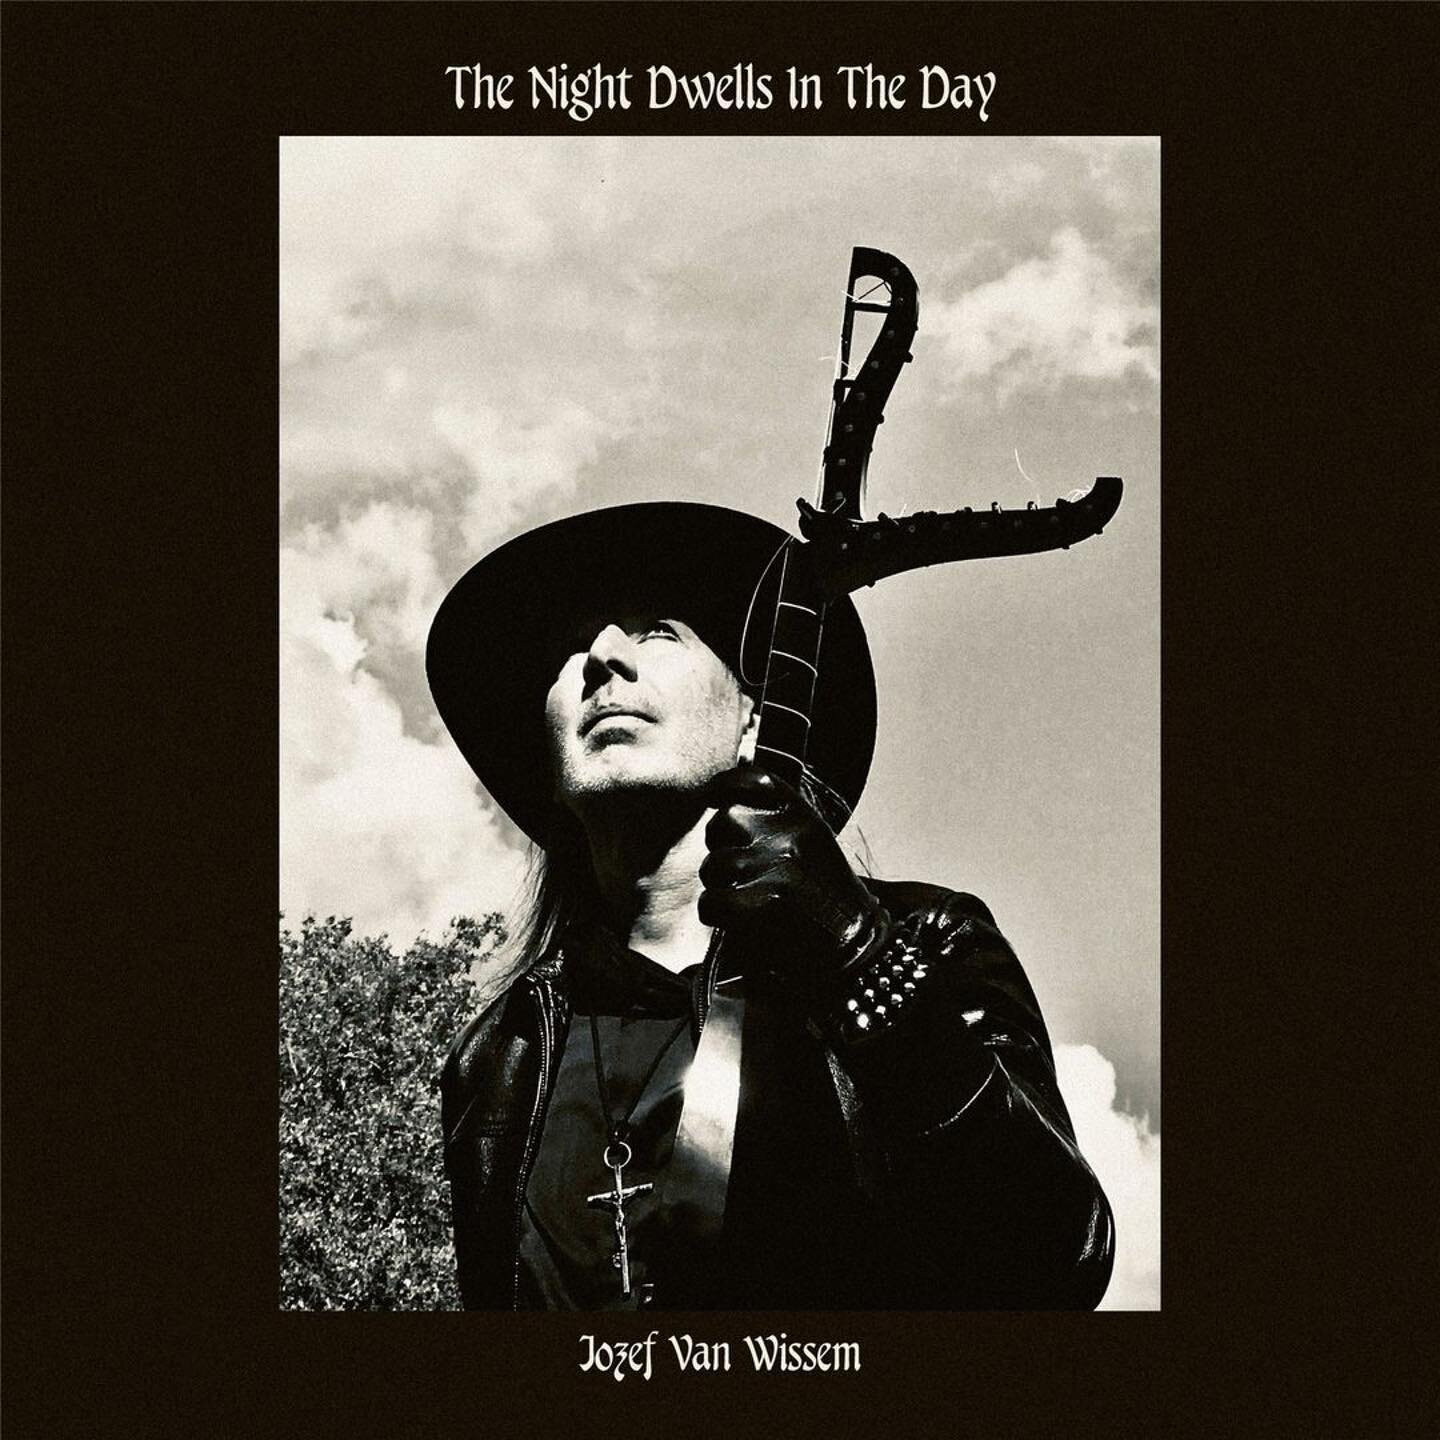 🖤🔈 @jozefvanwissem
・・・
The Night Dwells In The Day CD/DD/VINYL Out January 19th @Incunabulumrecords
The First Single and Short Film &ldquo; The Call Of The Deathbird&rdquo; premieres today on @bpmny. Film Link In Bio.
#incunabulumrecords #jozefvanw